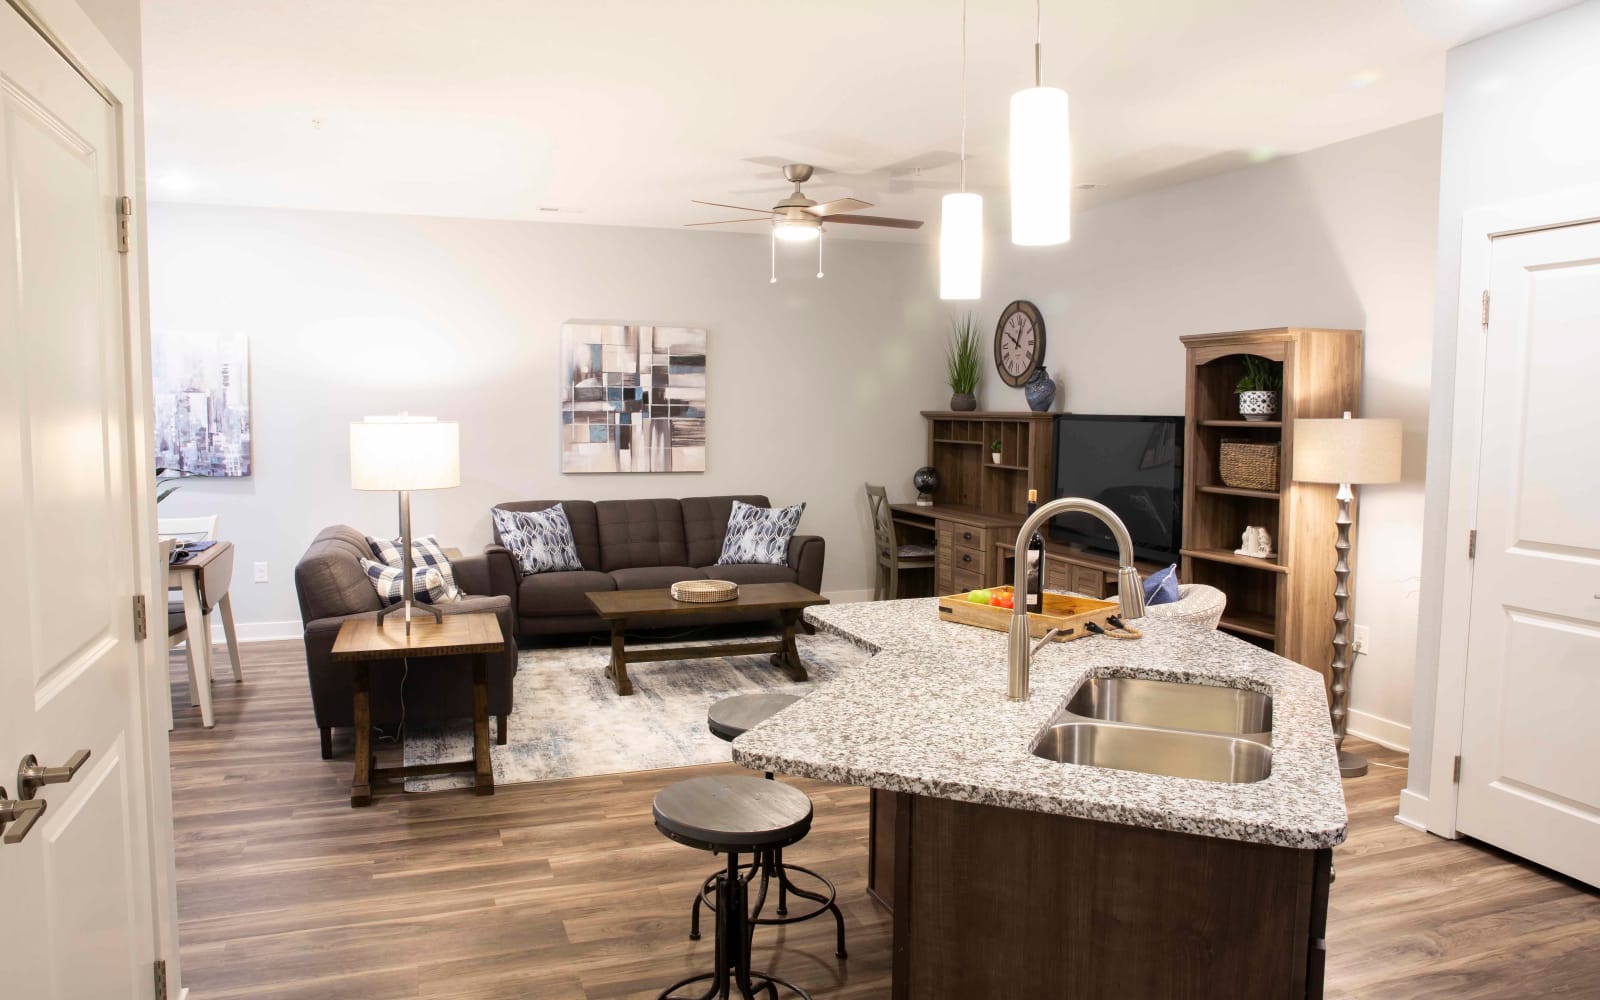 A living room and open kitchen with wood flooring at Attivo Trail in Ankeny in Ankeny, Iowa